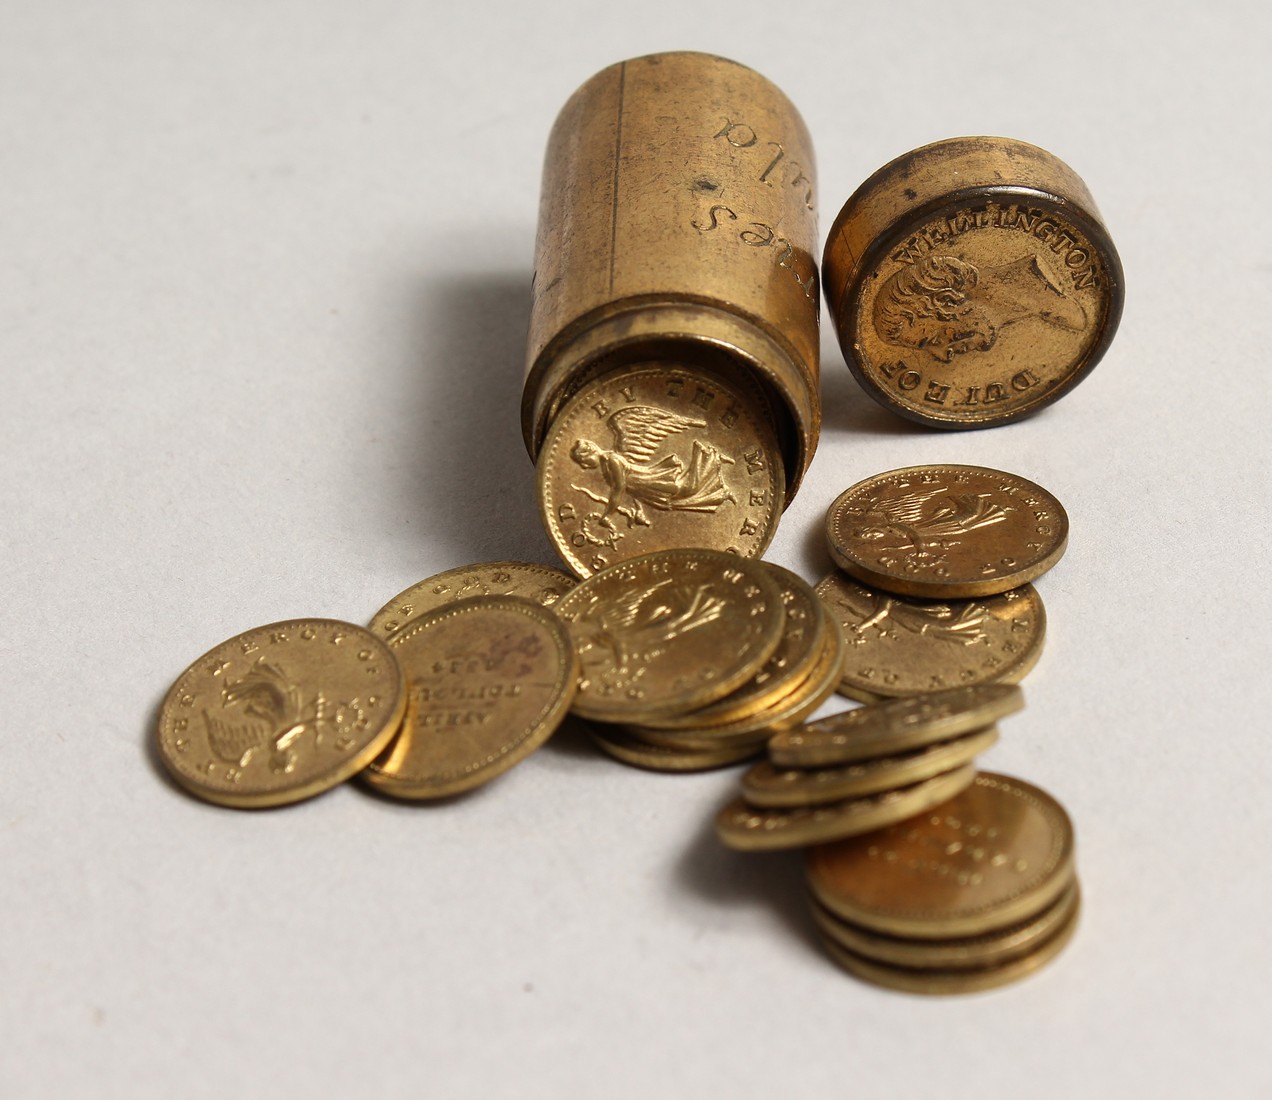 A SMALL TUBE OF COINS, BRITISH VICTORIUS PENINSULAR